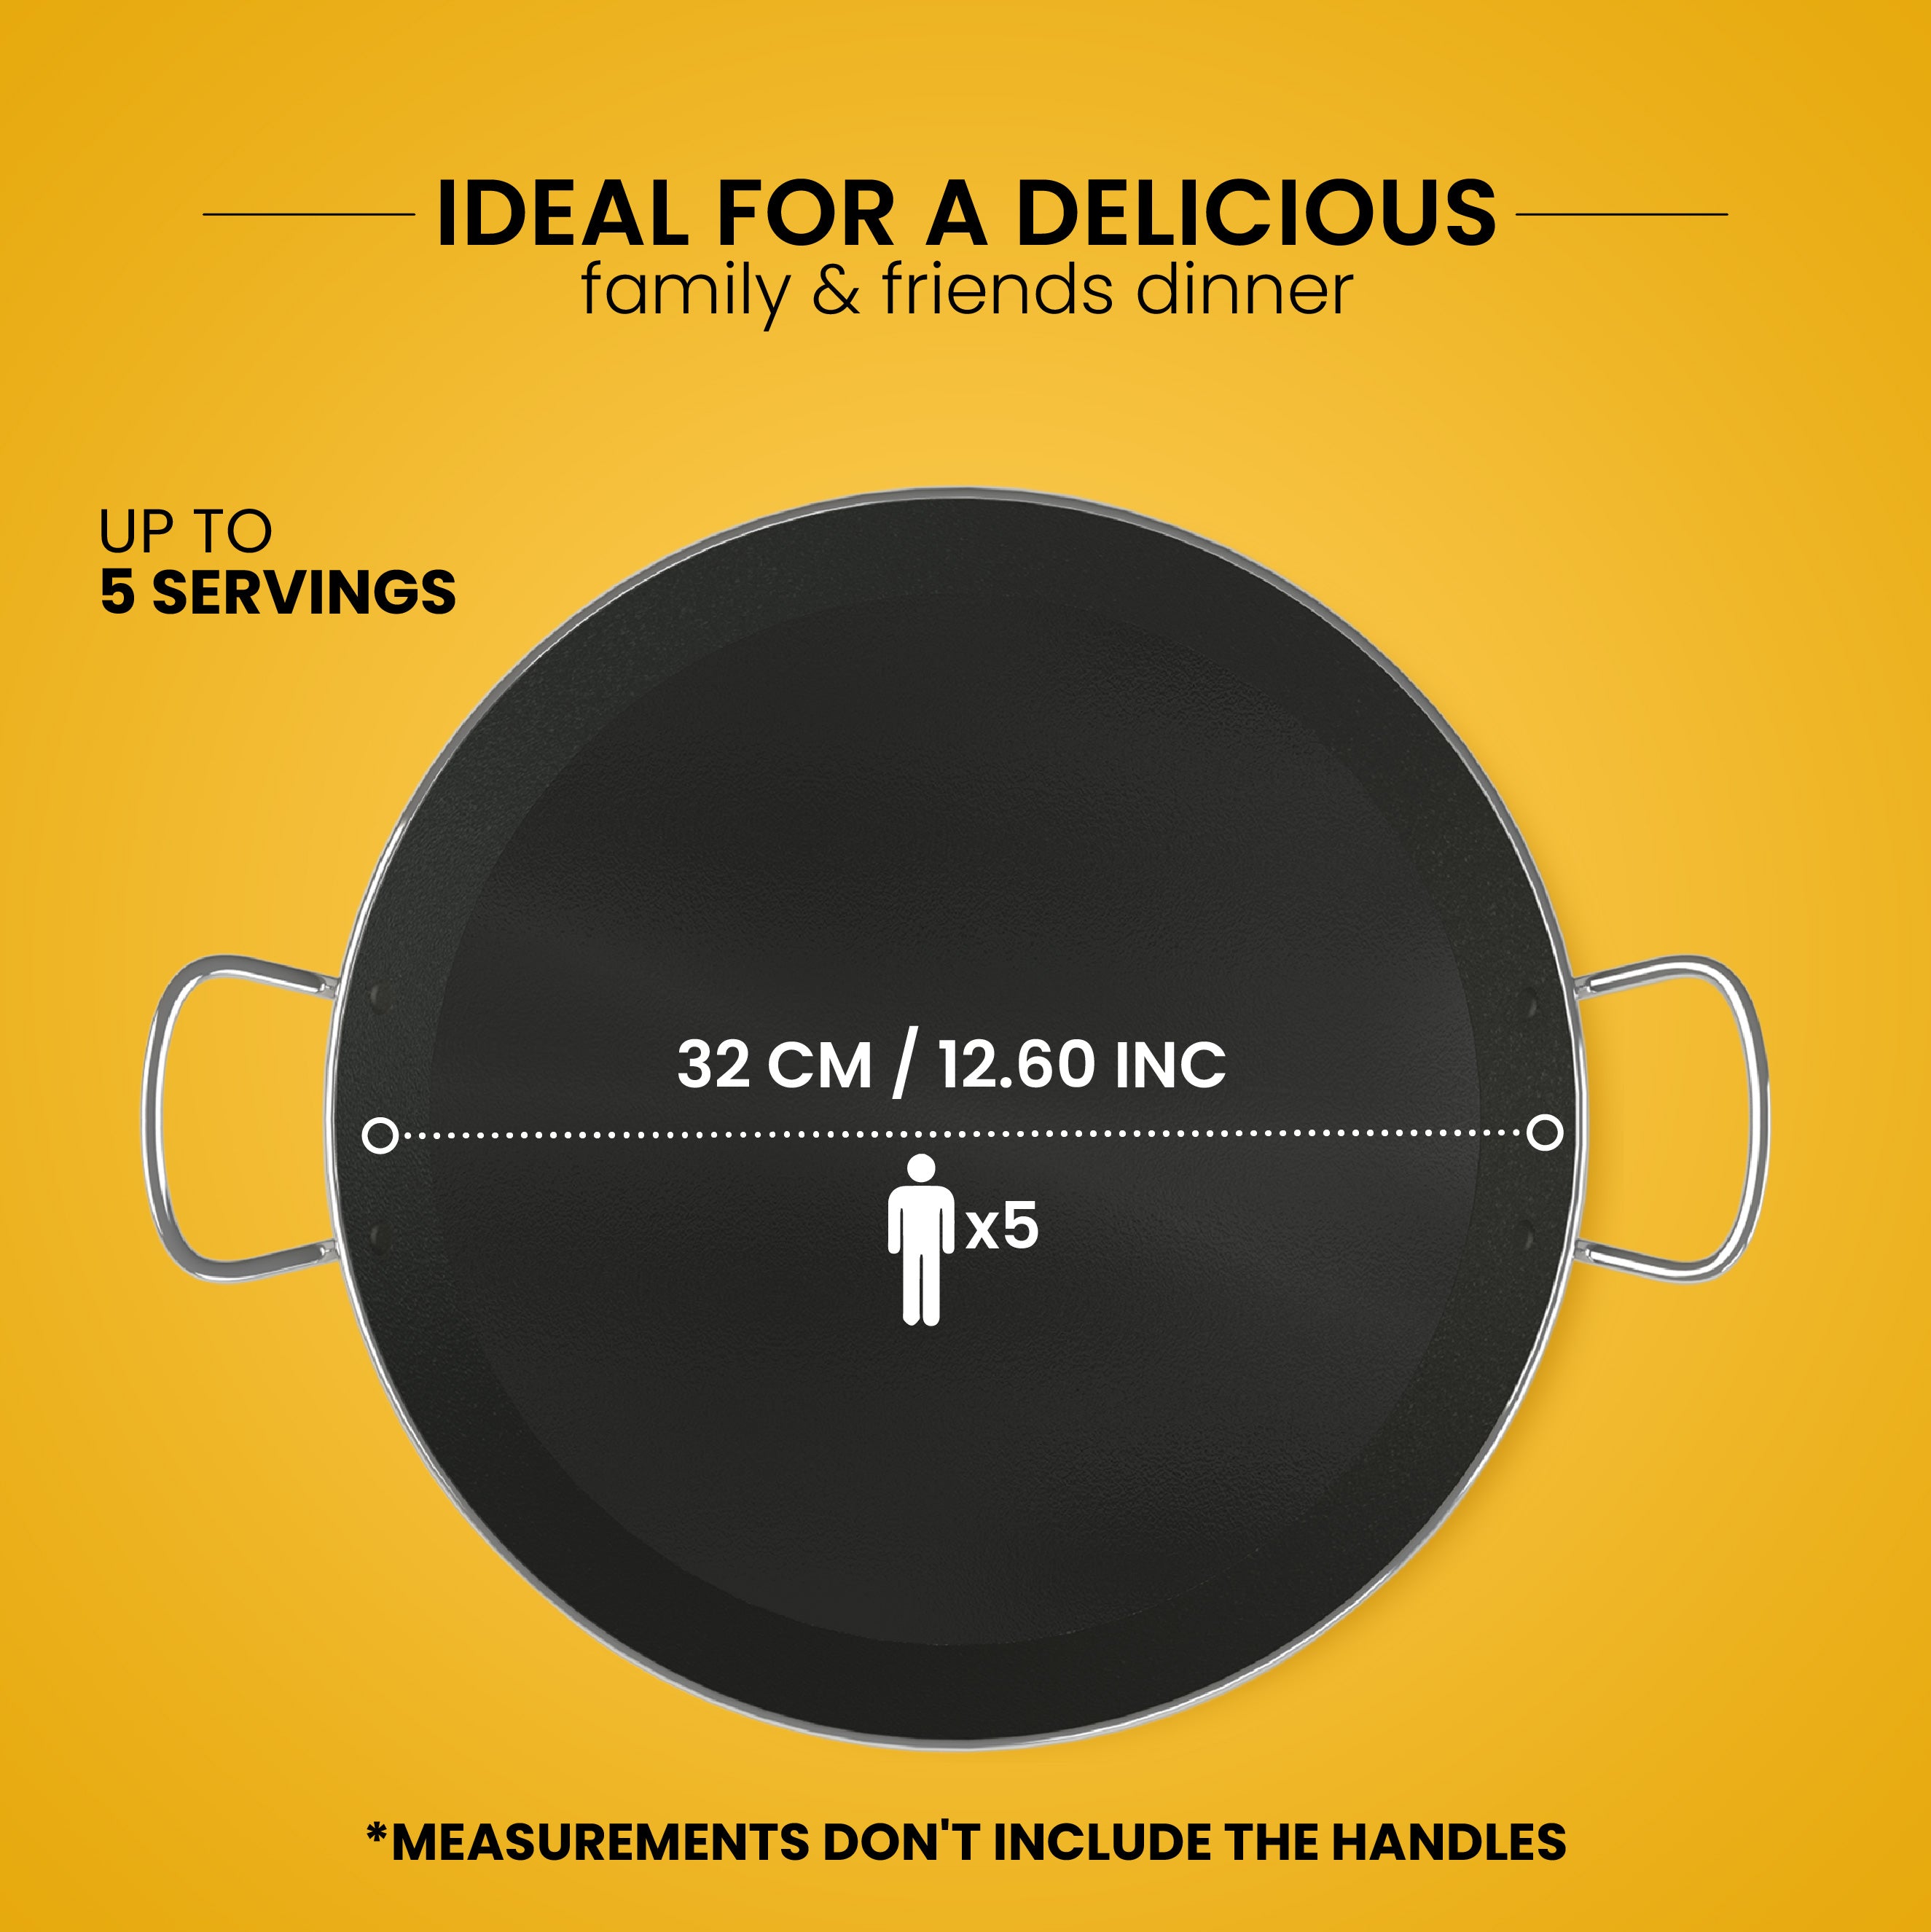 13 in Stainless Steel Pan with Non-Sticking Surface | 32 cm | 5 Servings